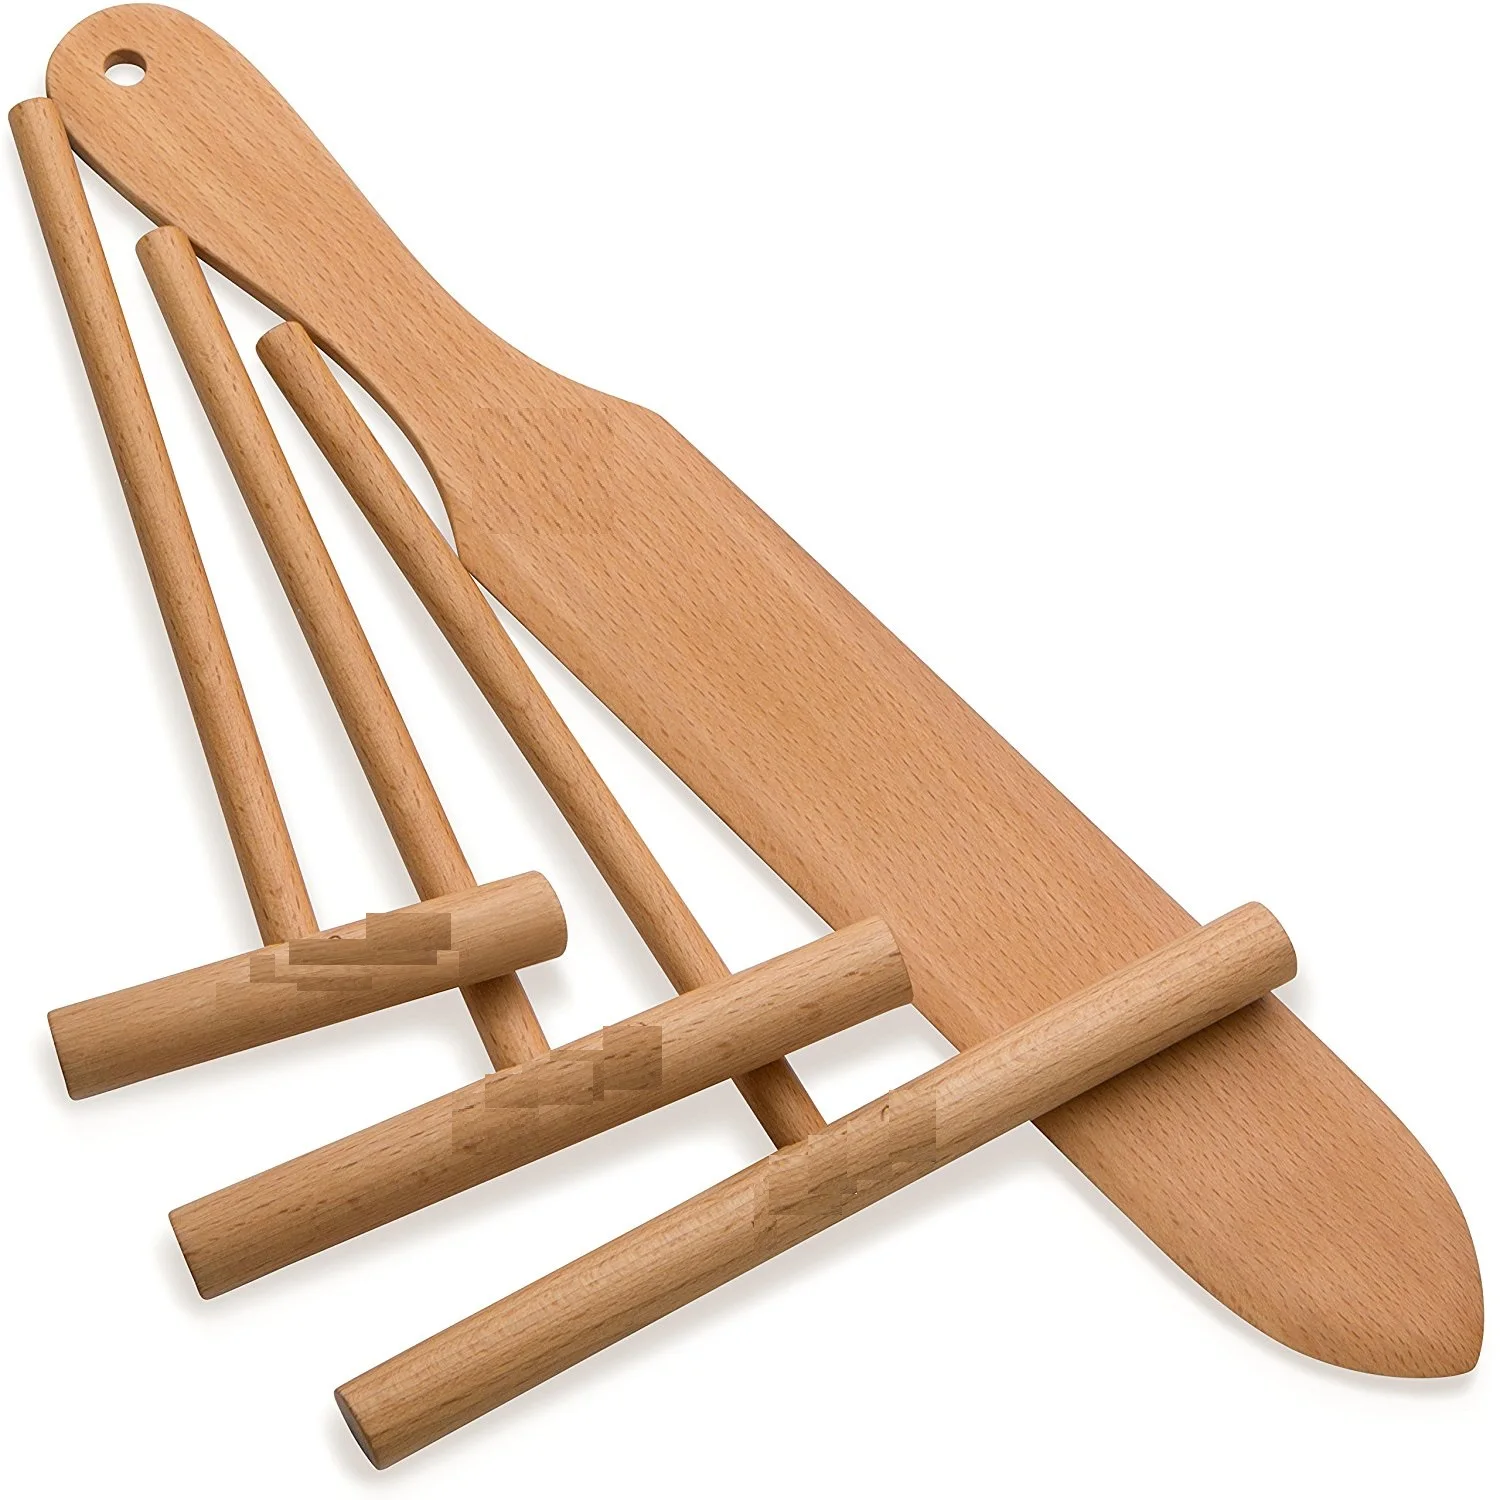 Set of 7 Crepe Spreader and Spatula Set Wooden Crepe Making Tools 